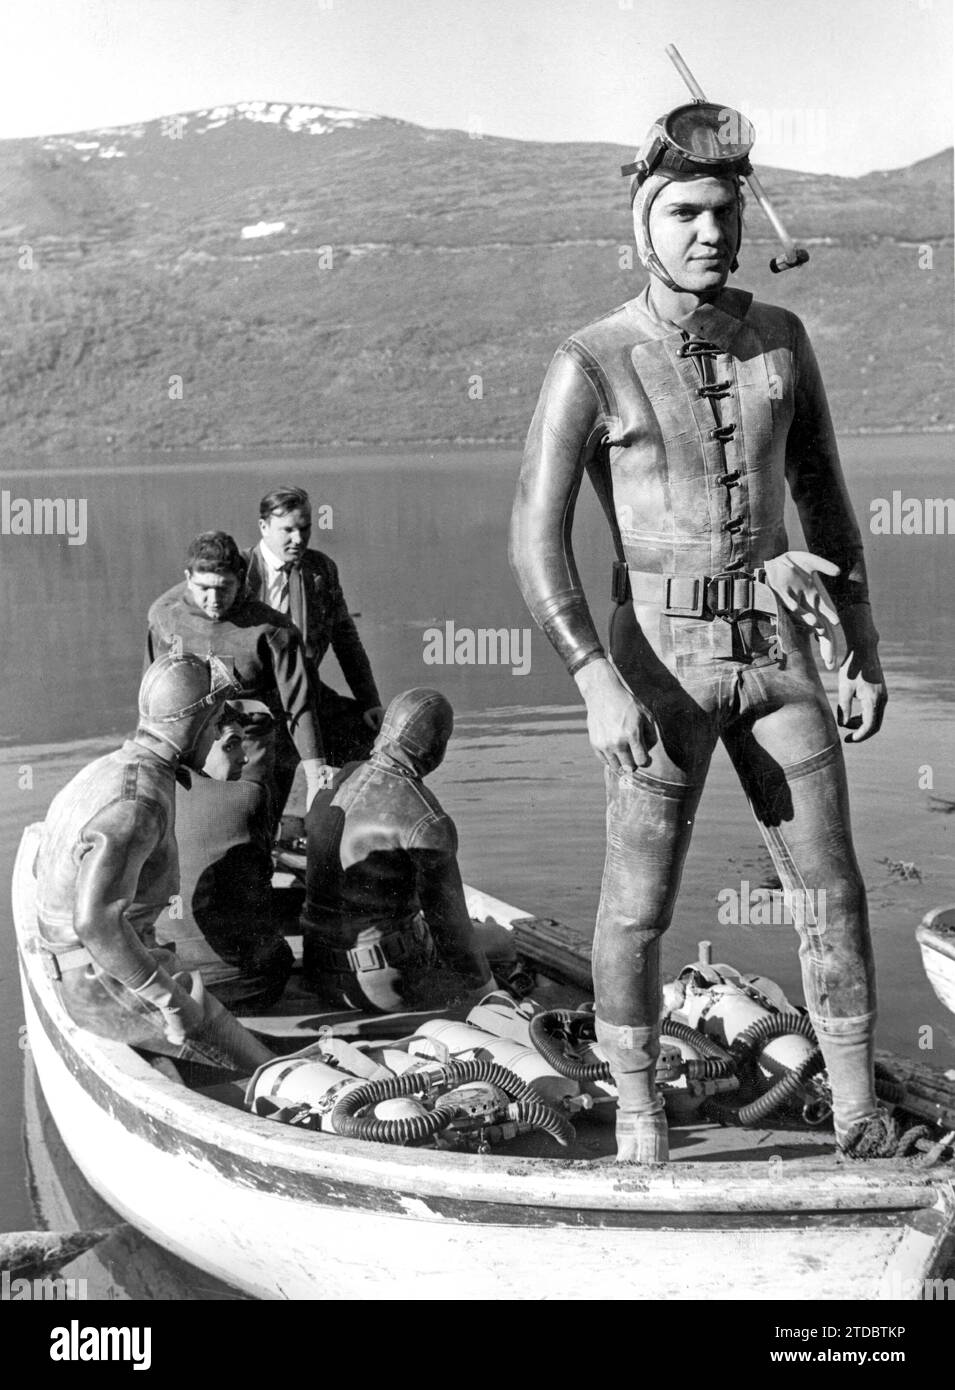 01/11/1959. The Dives of the Frogmen of the Spanish Navy were going to begin when this Photo was Obtained, in which Sebastián Rodríguez, shows us with an impressive appearance, like an extraterrestrial man. Credit: Album / Archivo ABC / Basabe Stock Photo